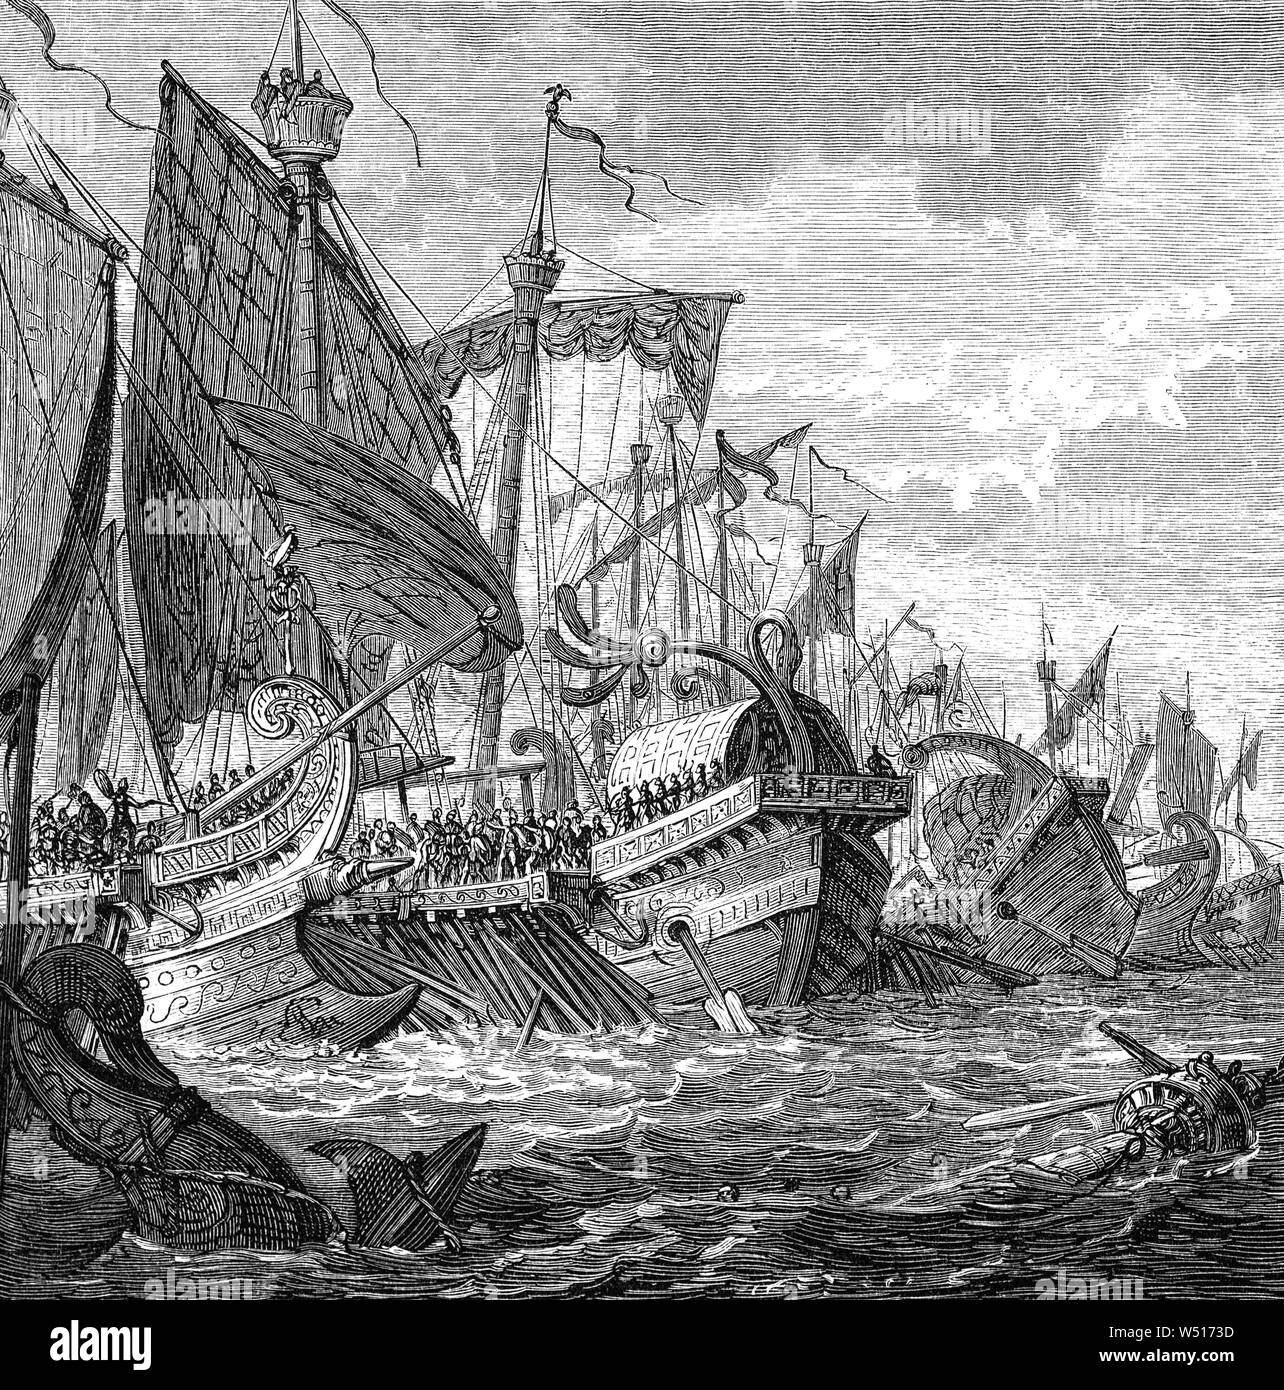 In 256 BC, during the First Punic War (264-241 B.C.) one of the greatest naval battles in history took place off Cape Pelorus on the coast of Sicily, Italy when 330 ancient Roman ships confronted 350 Carthaginians ships. The struggle was long and many lives were lost. The fight between these two huge ancient powers is today known as the Battle Of Cape Ecnomus,was eventually won by the Romans. Stock Photo